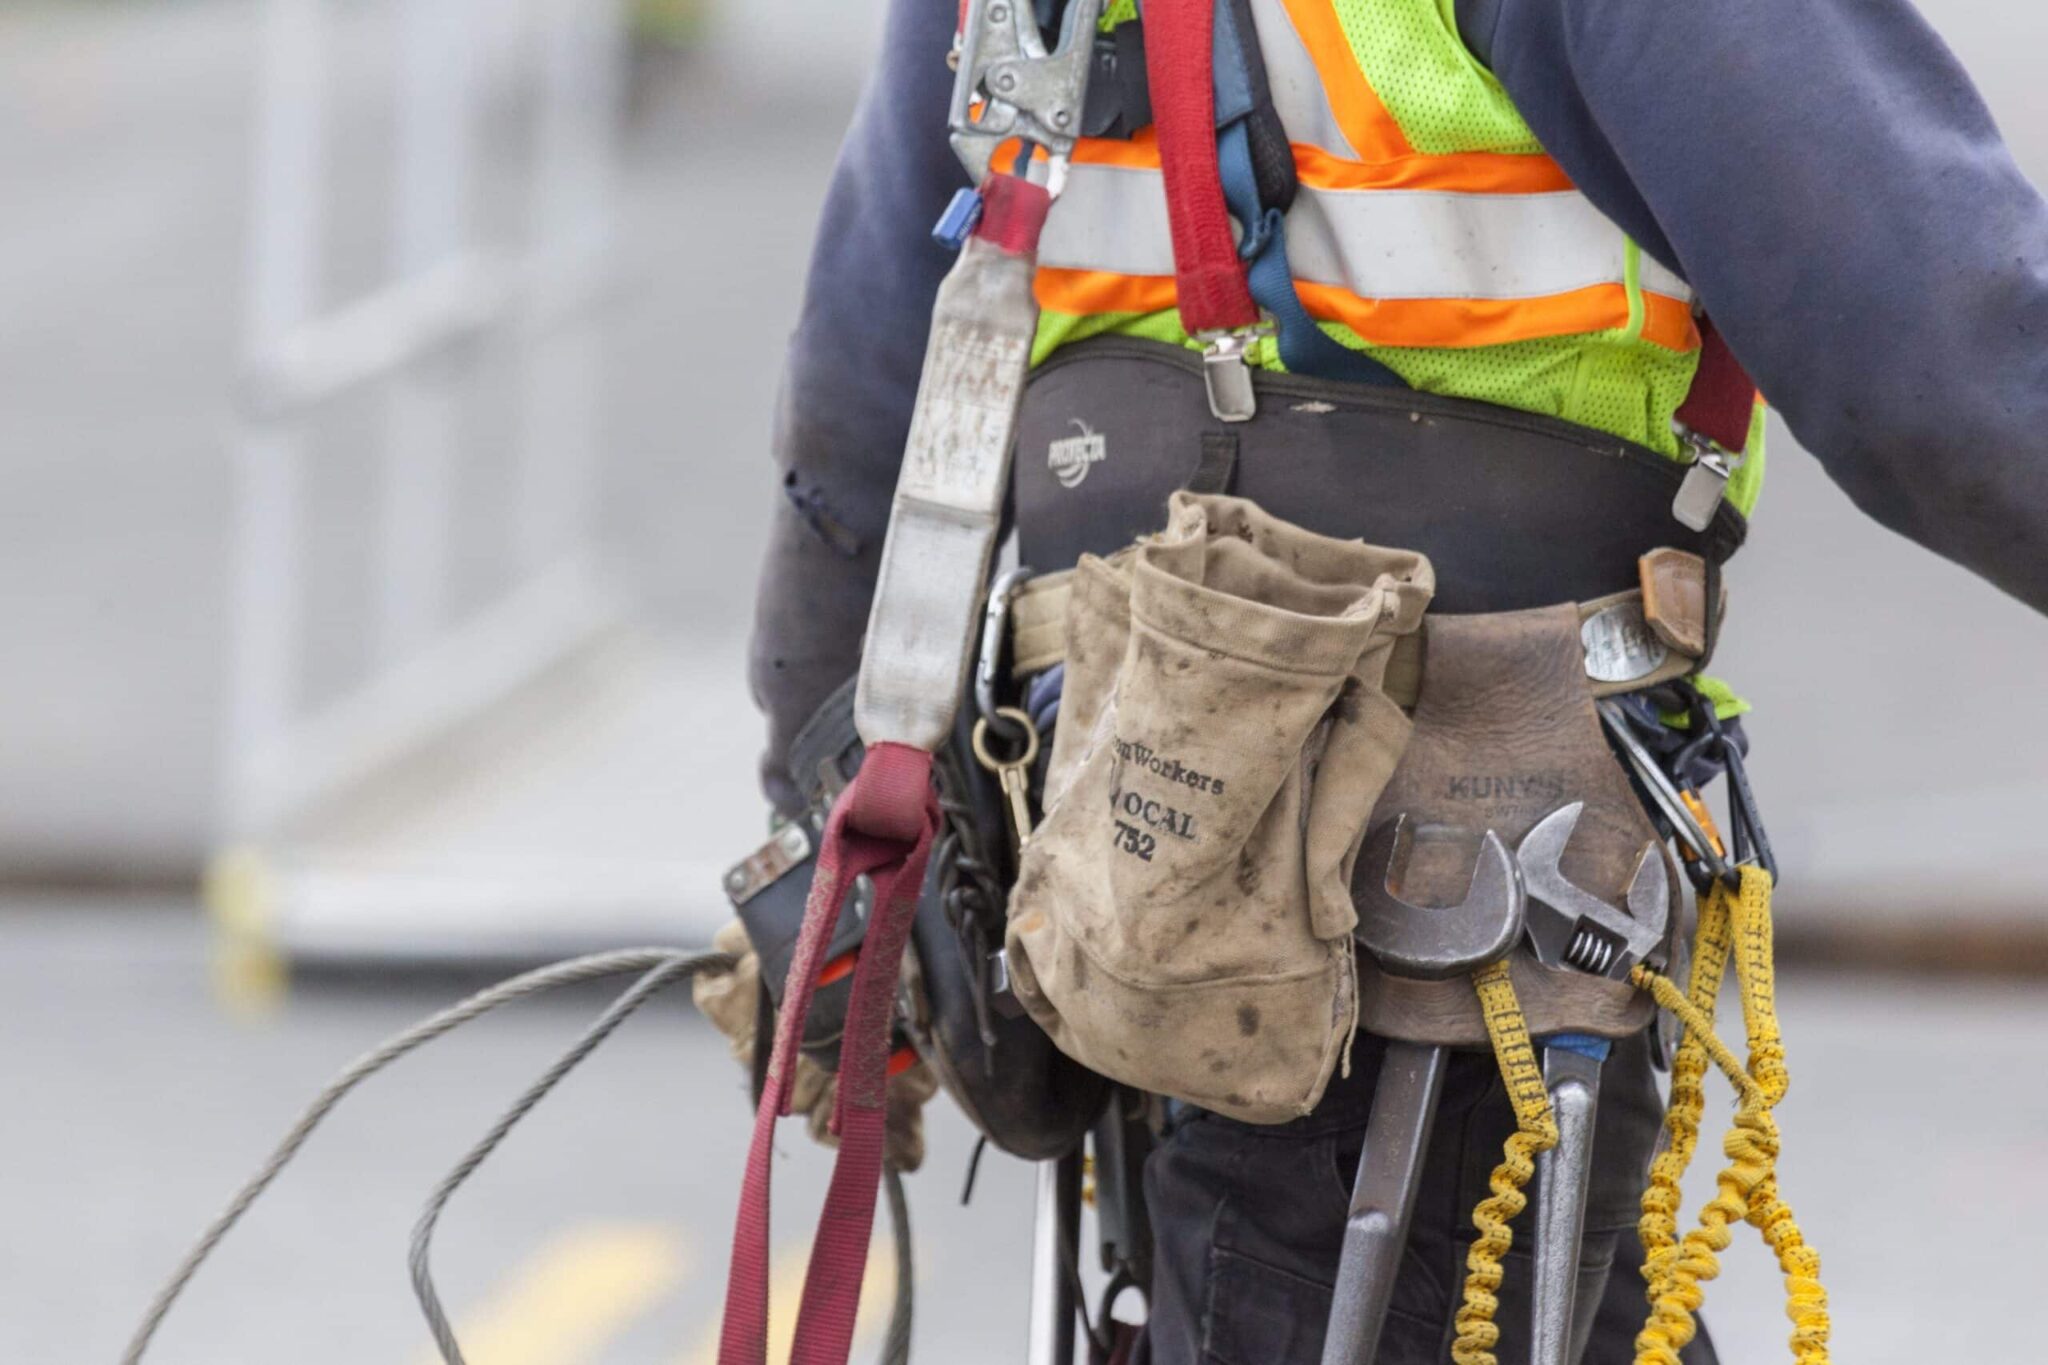 Tools and a bag are seen hanging from construction worker's tool belt. The worker is wearing a reflective safety vest.